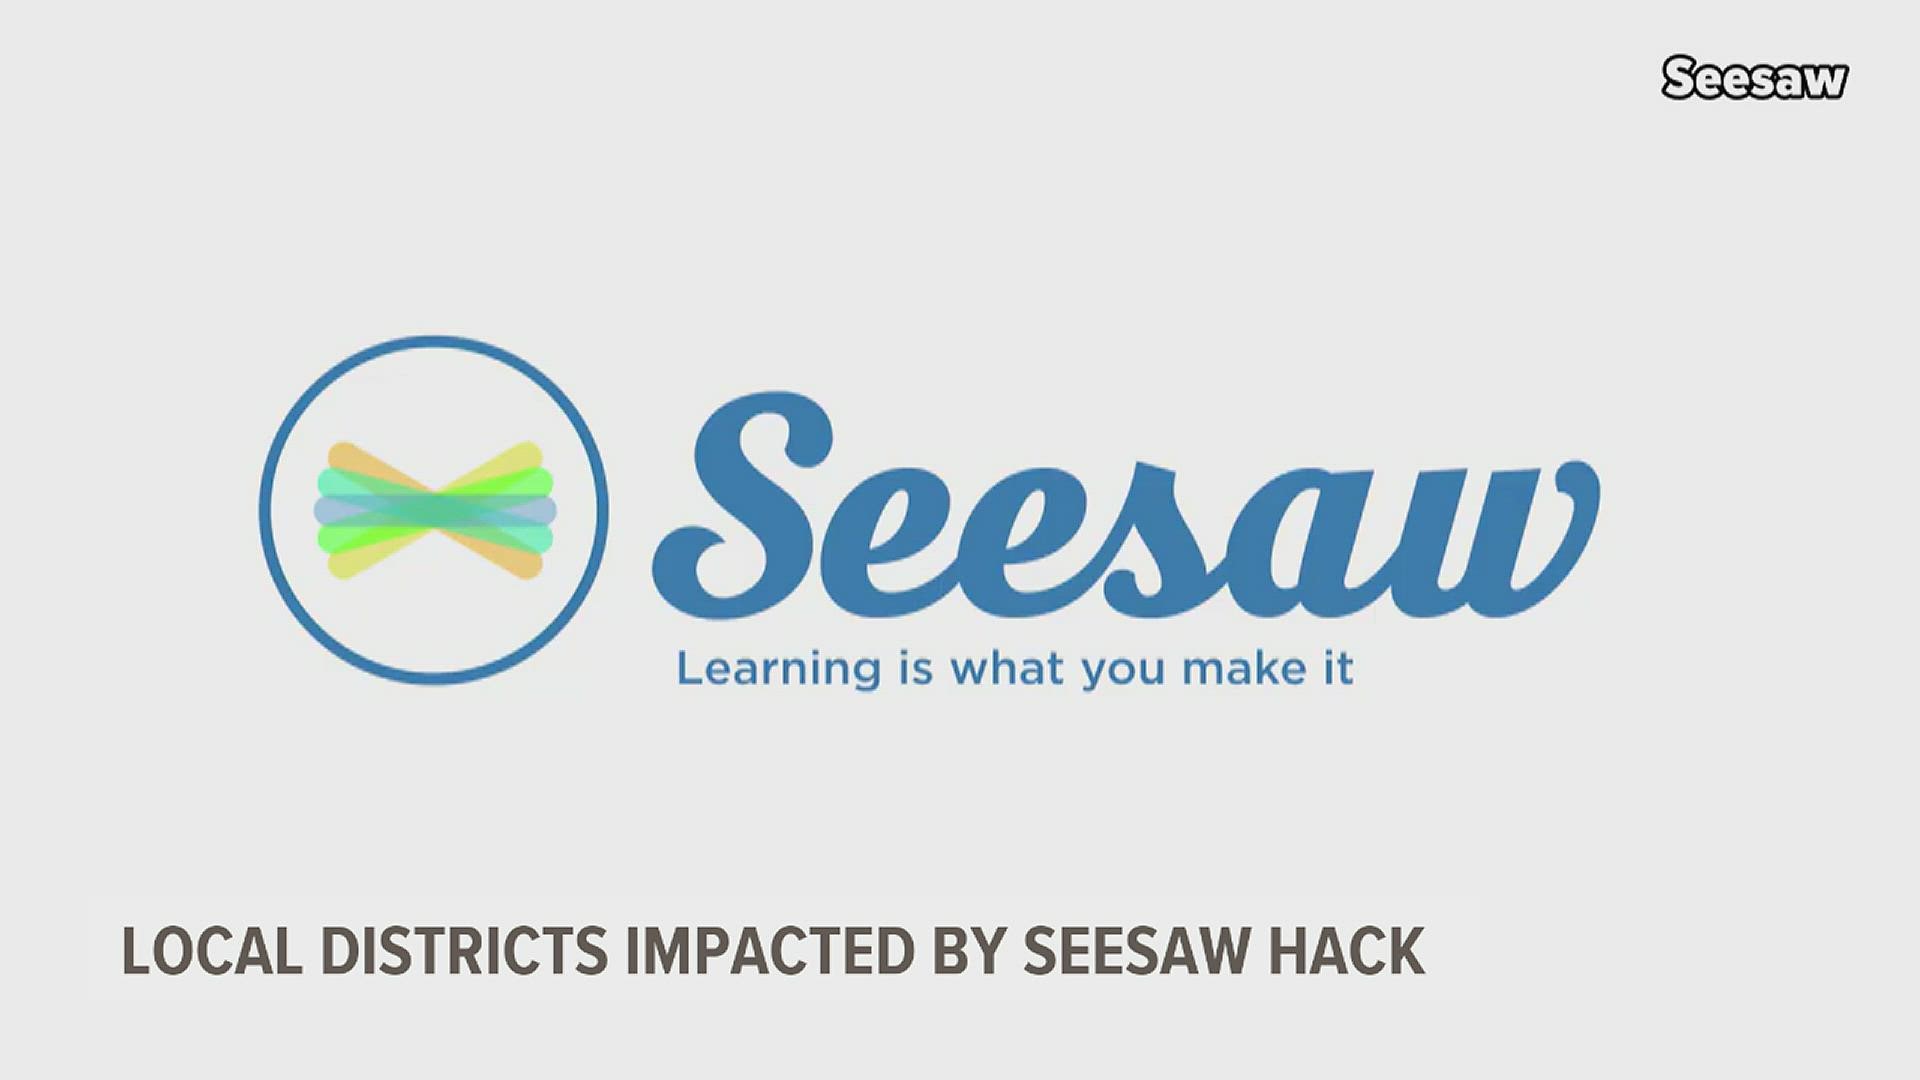 Seesaw is an online portal and app which allows teachers to communicate assignments and other information to students and parents.